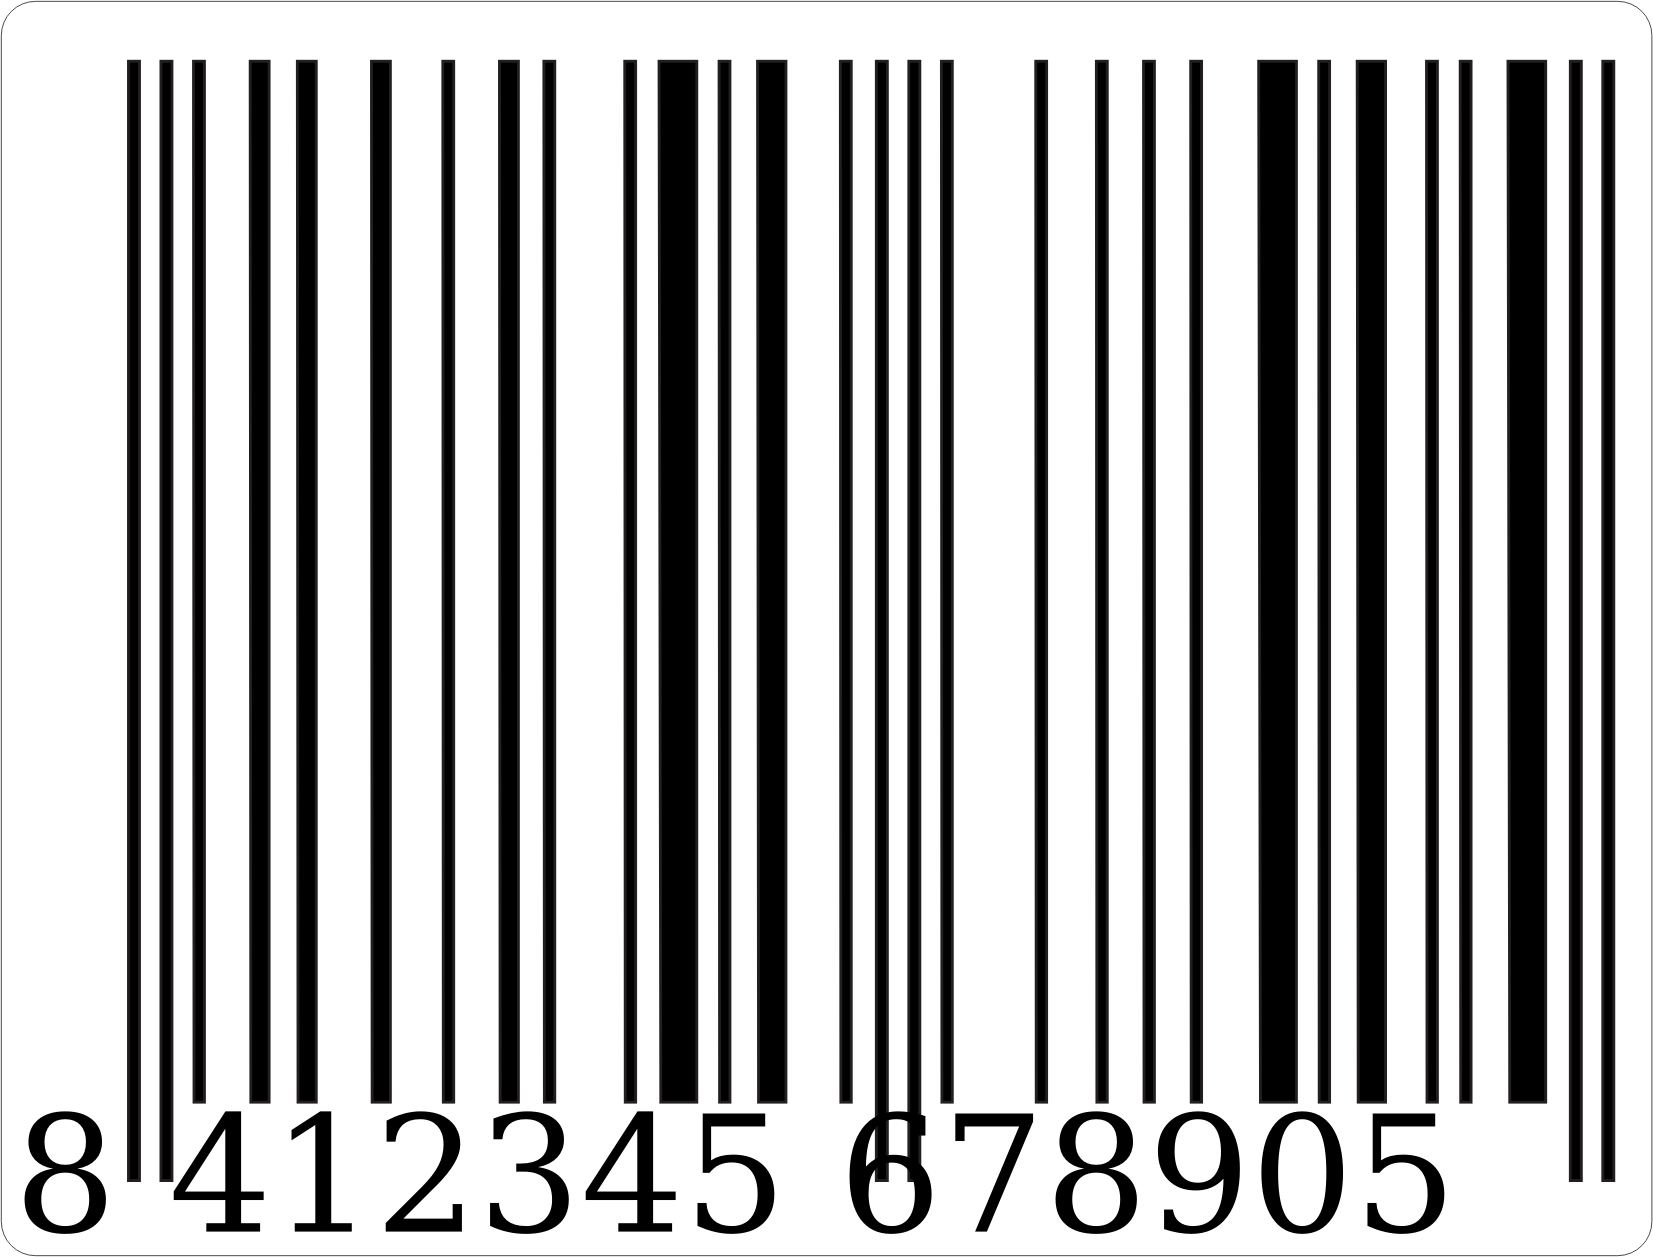 barcode clipart - photo #50